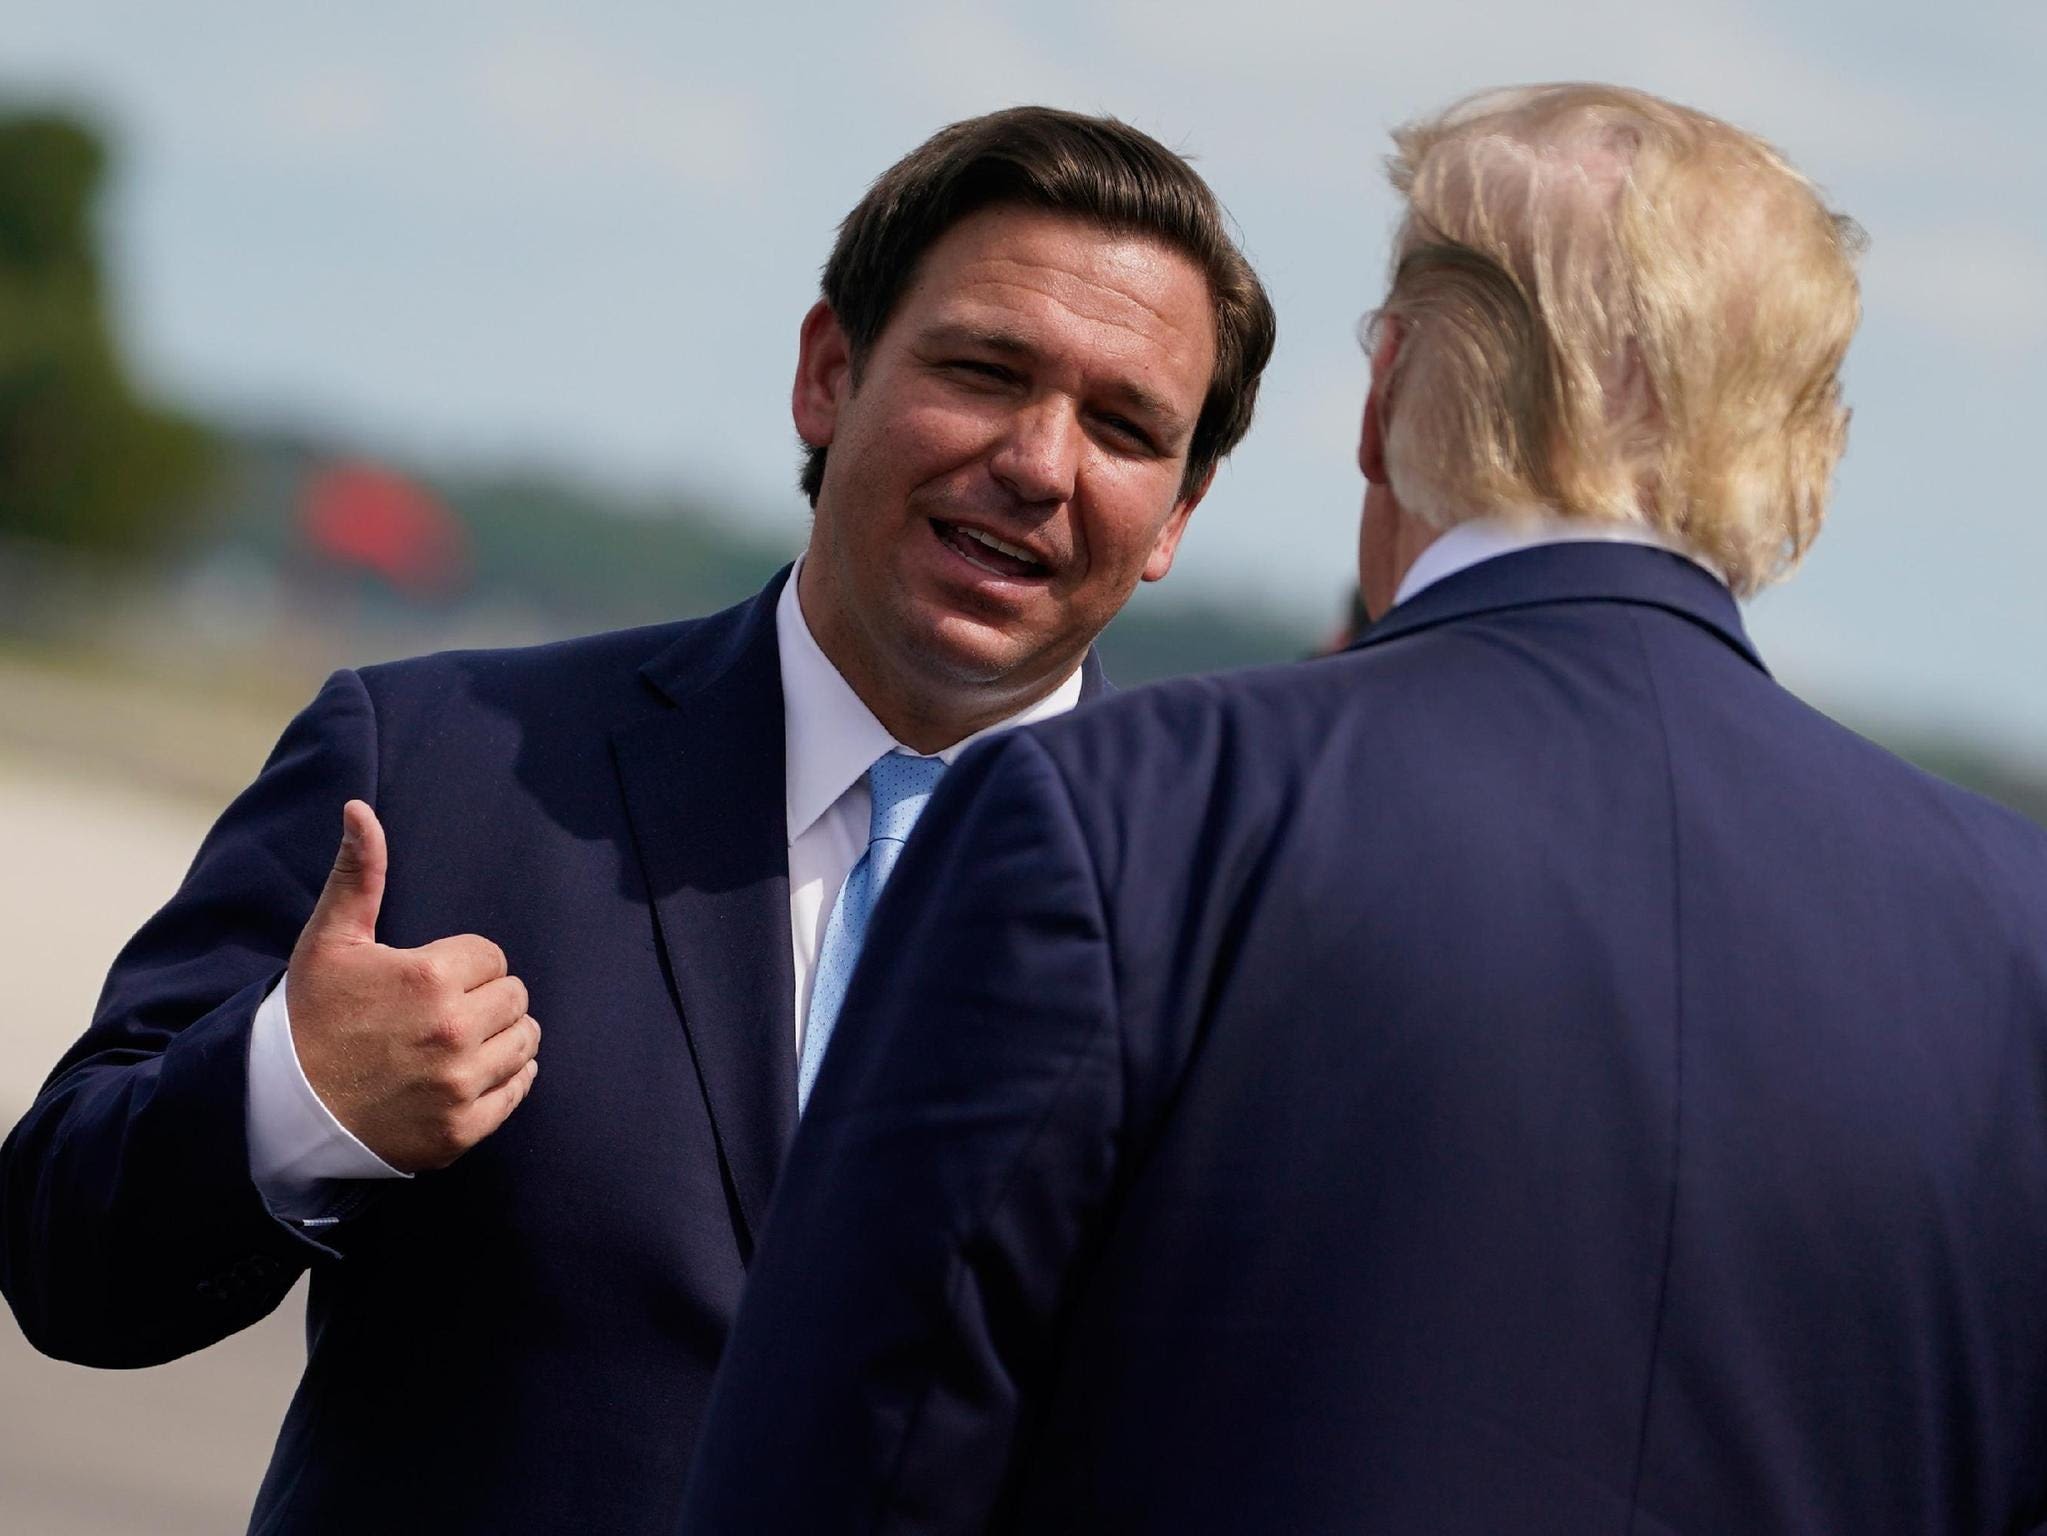 Florida Gov. DeSantis erases climate change references from state law before hurricane season